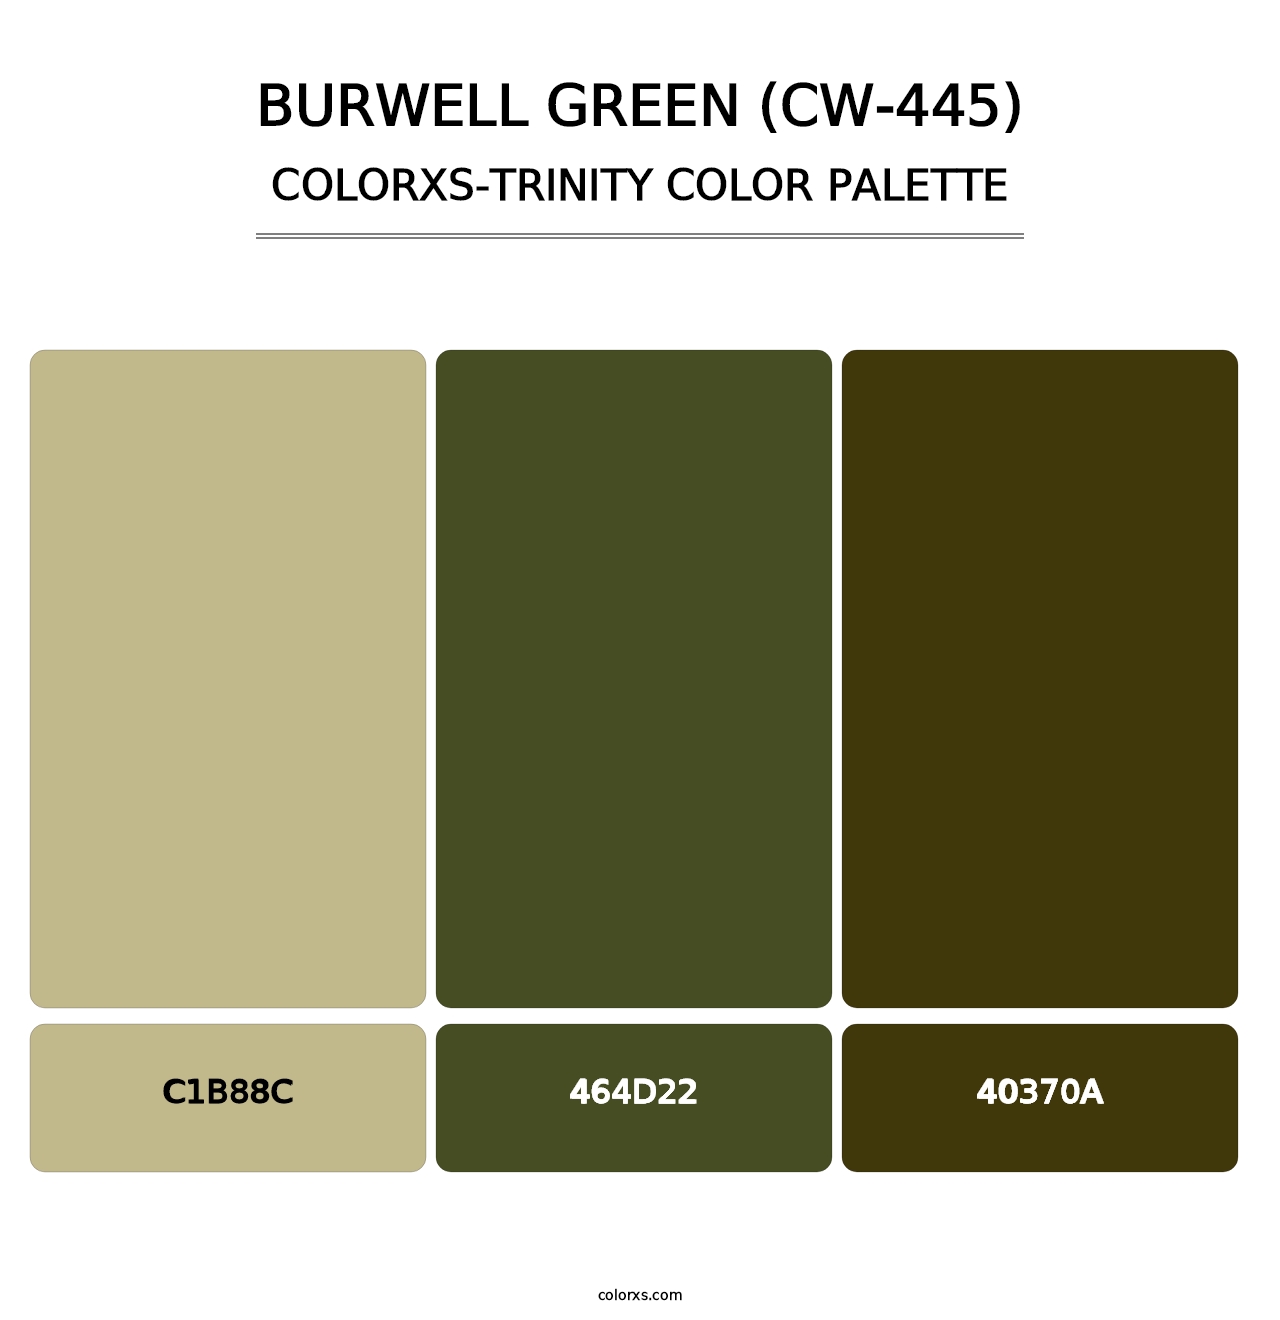 Burwell Green (CW-445) - Colorxs Trinity Palette